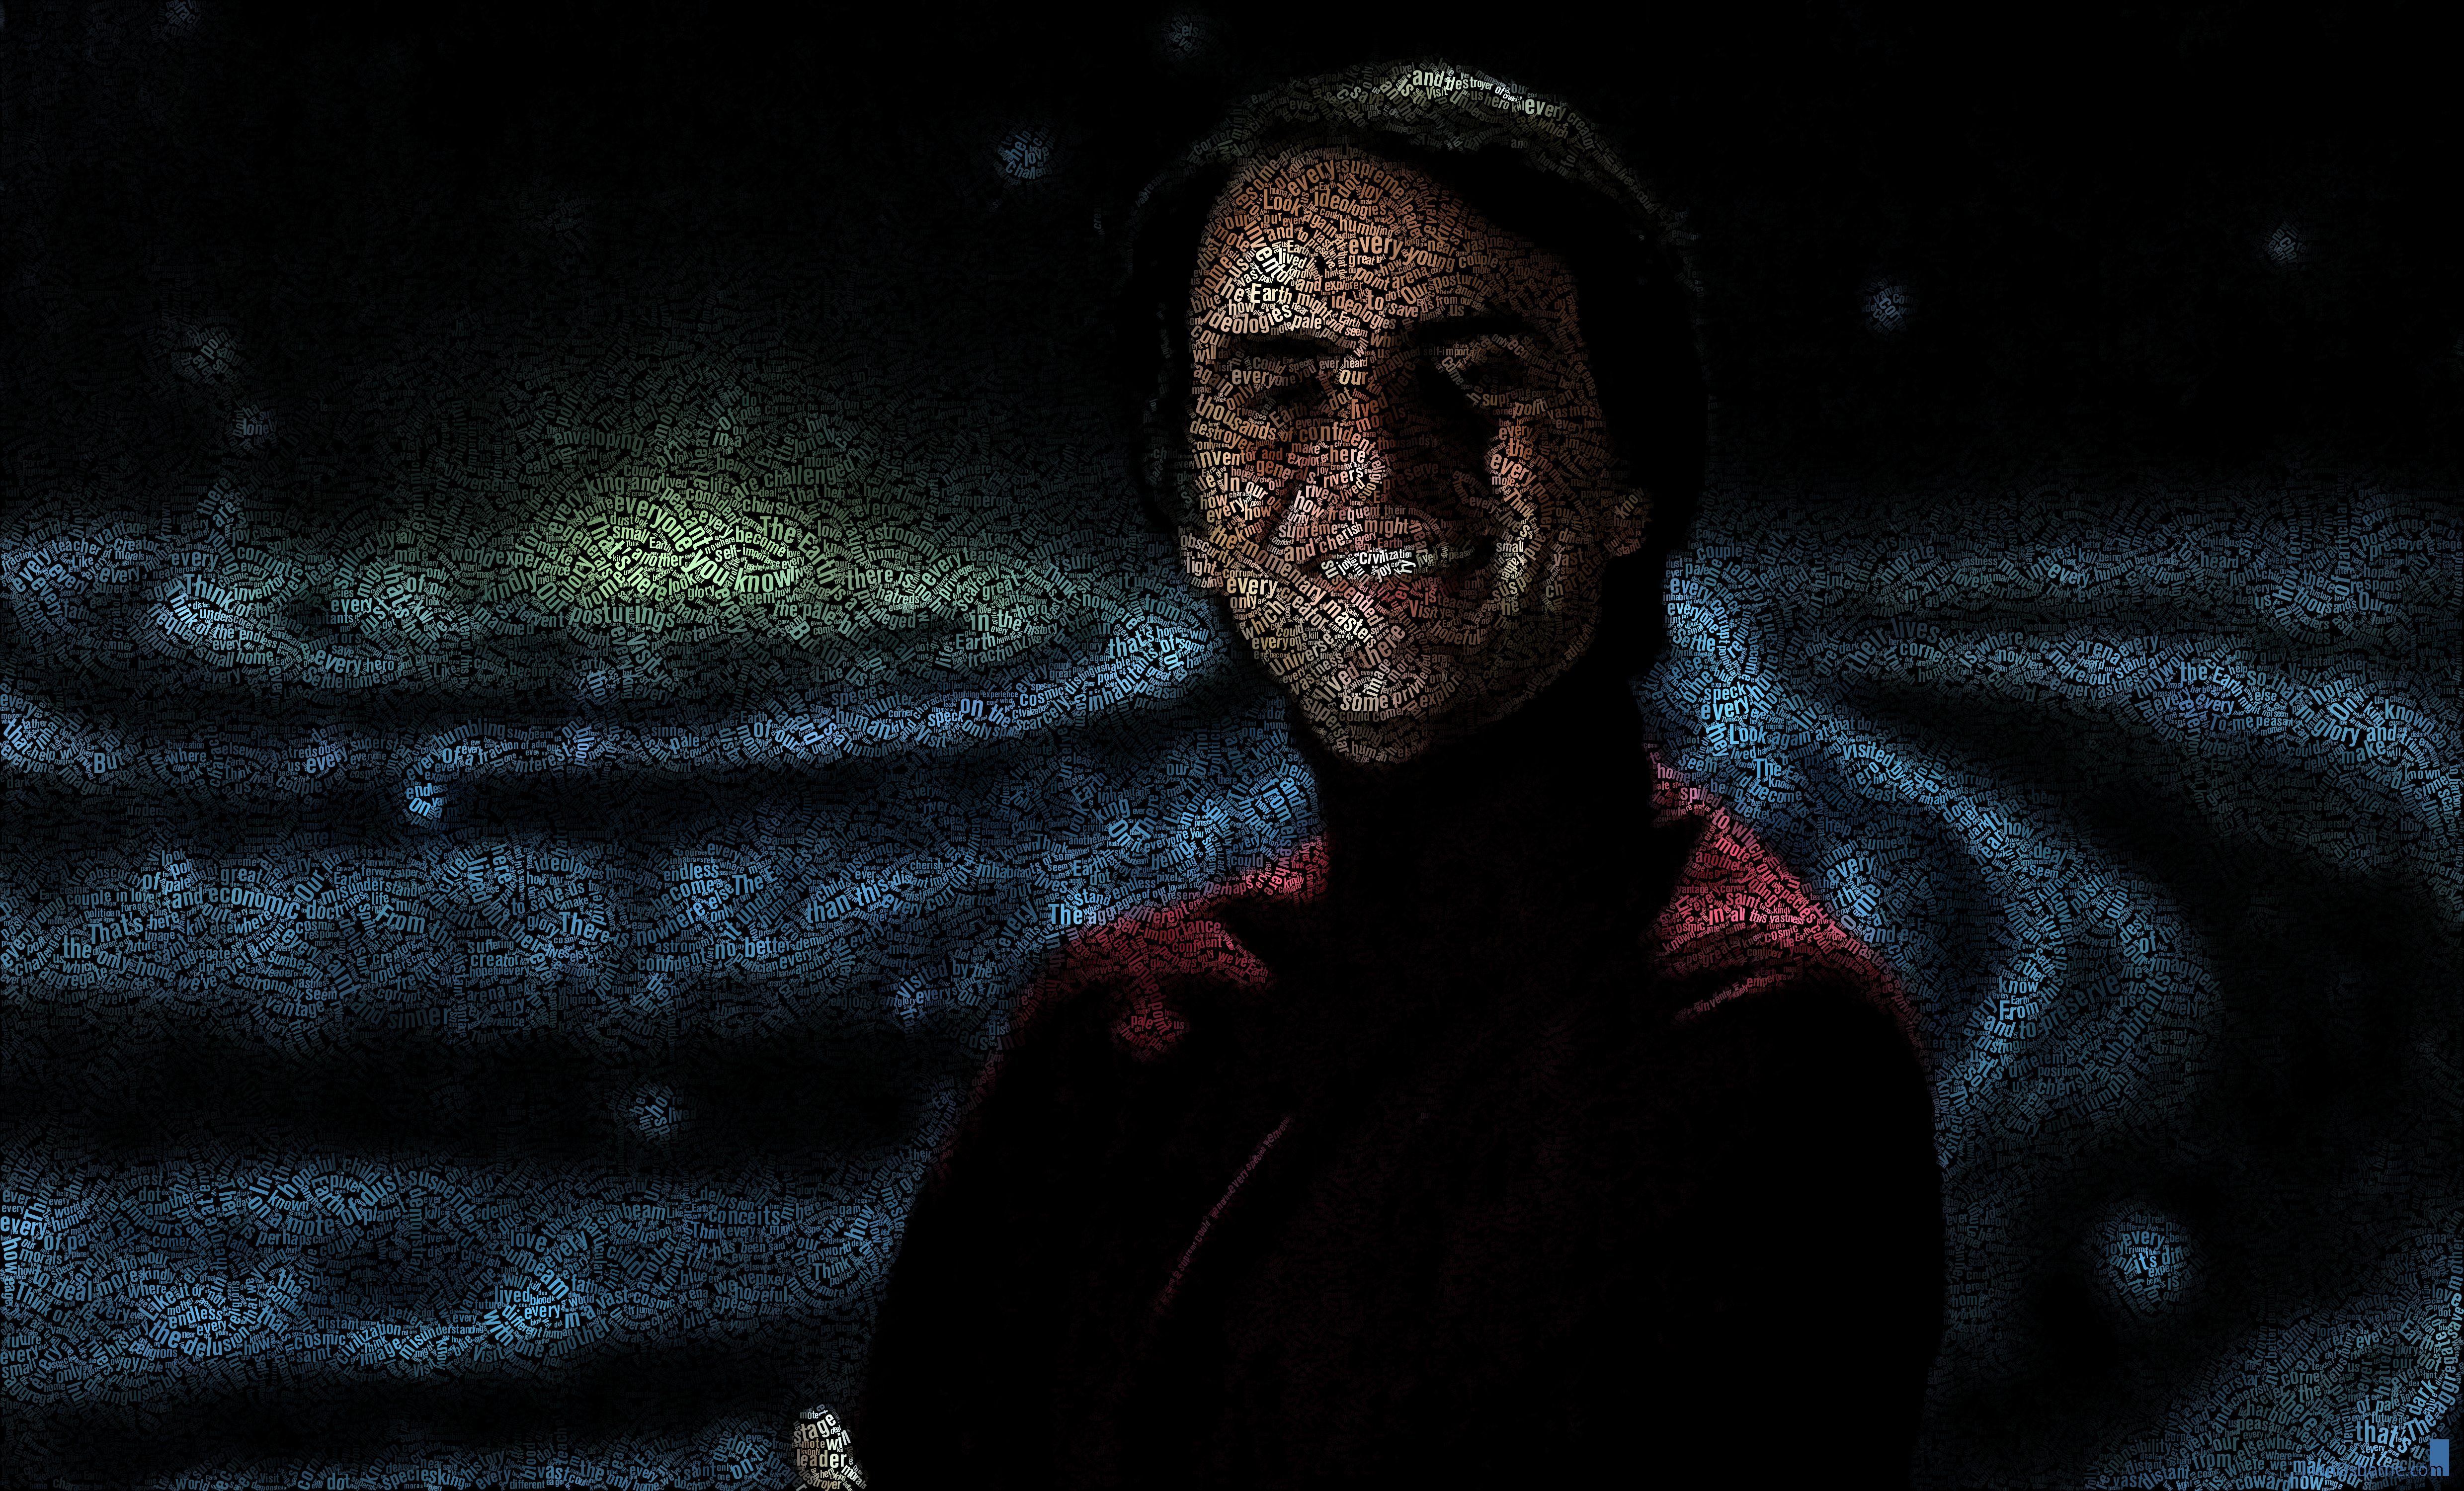 0561-Carl Sagan (November 9, 1934 – December 20, 1996) was an American astronomer, astrophysicist, cosmologist, author, science popularizer, and science communicator.jpg